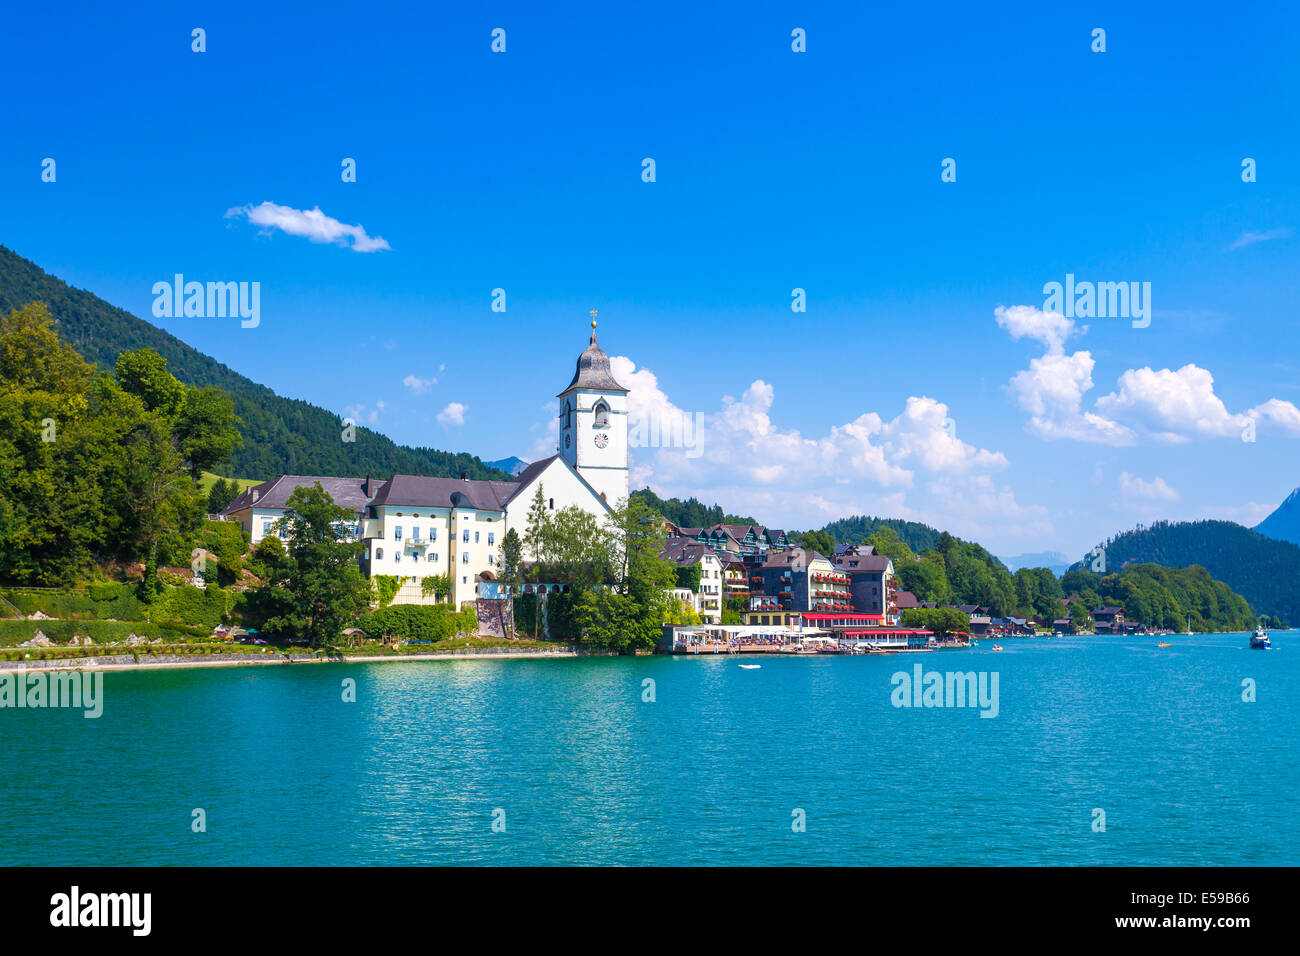 View of View of St. Wolfgang chapel and the village waterfront at Wolfgangsee lake, Austria Stock Photo